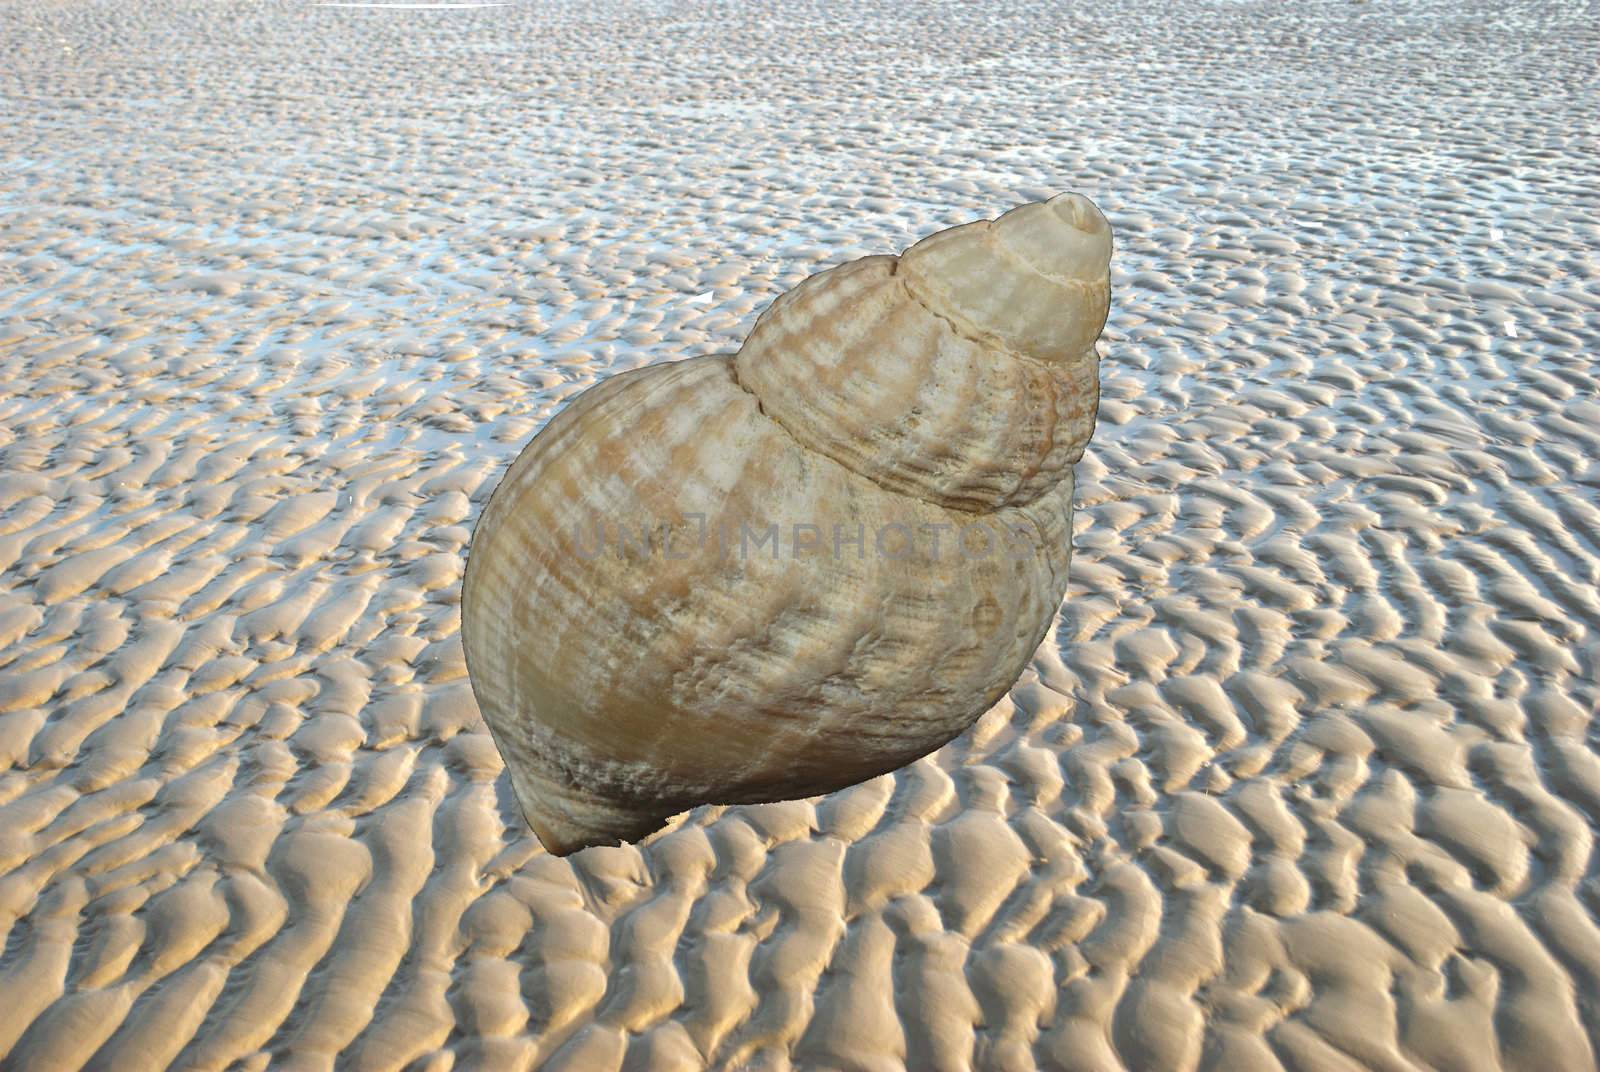 Giant sea shell by pauws99